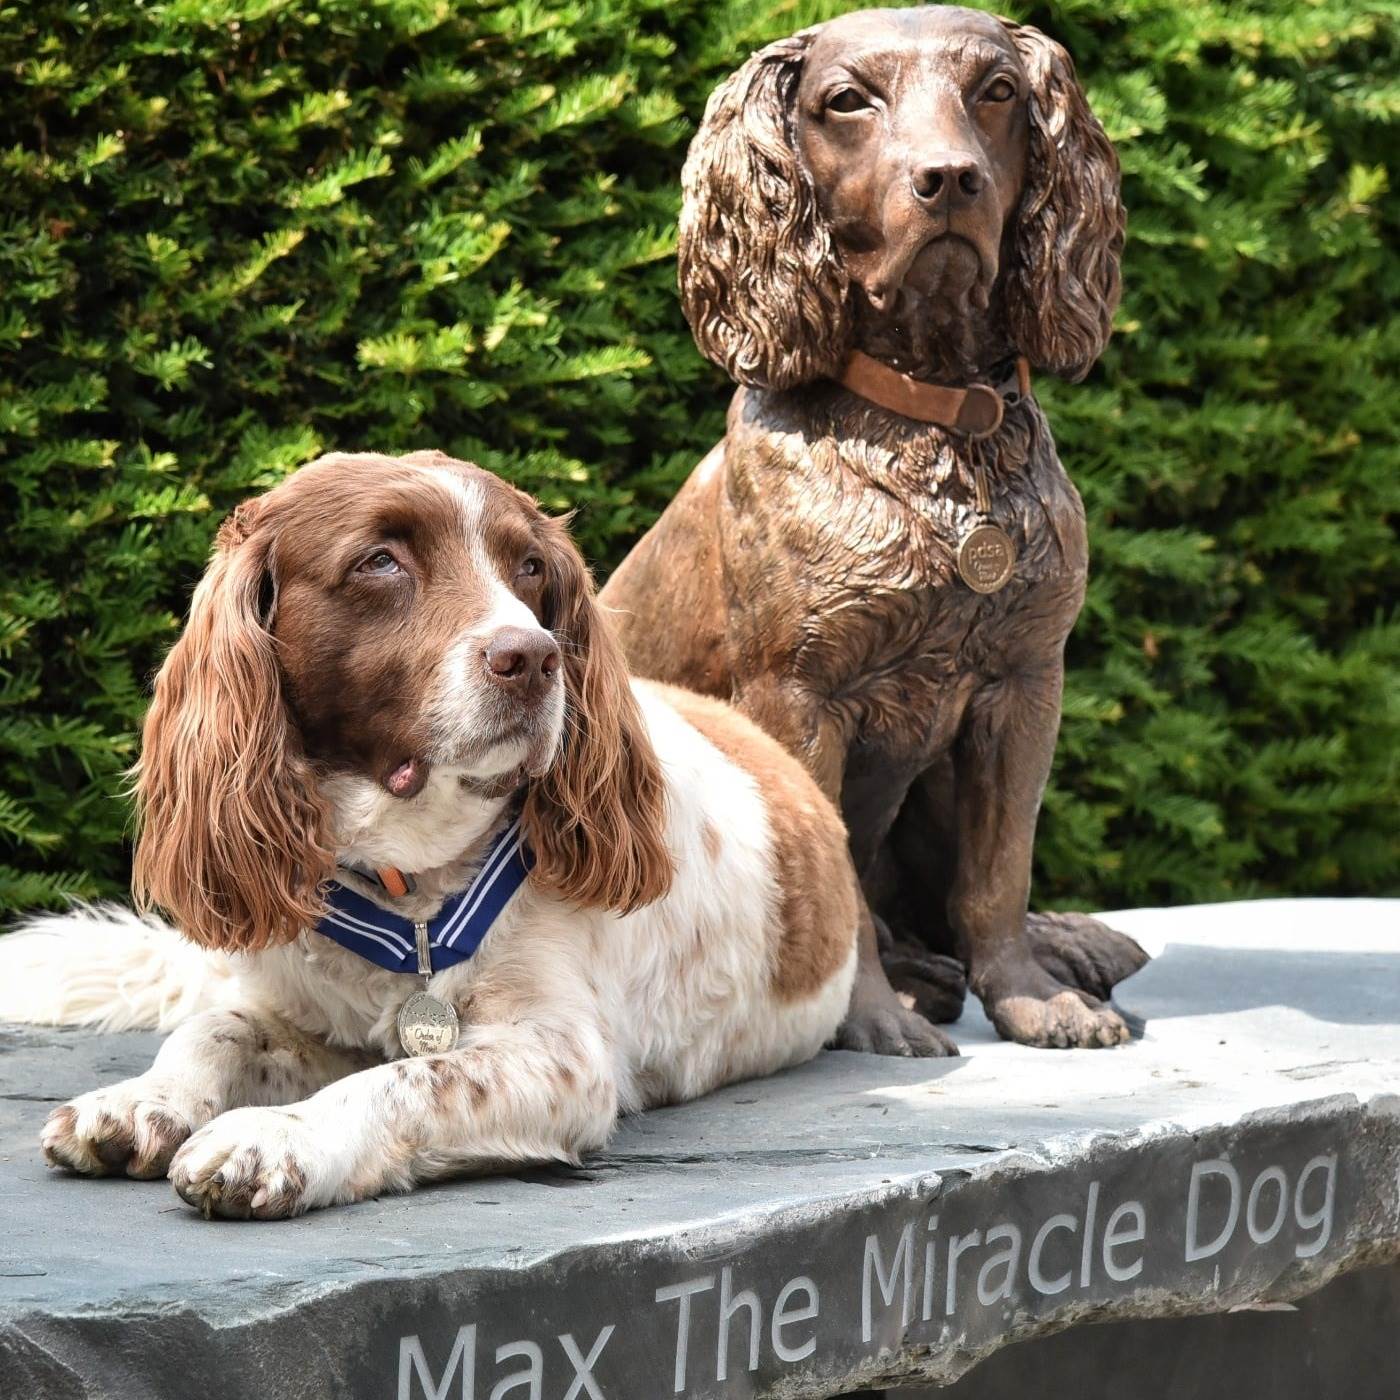 Max the miracle dog sitting by a bronze statue version of himself